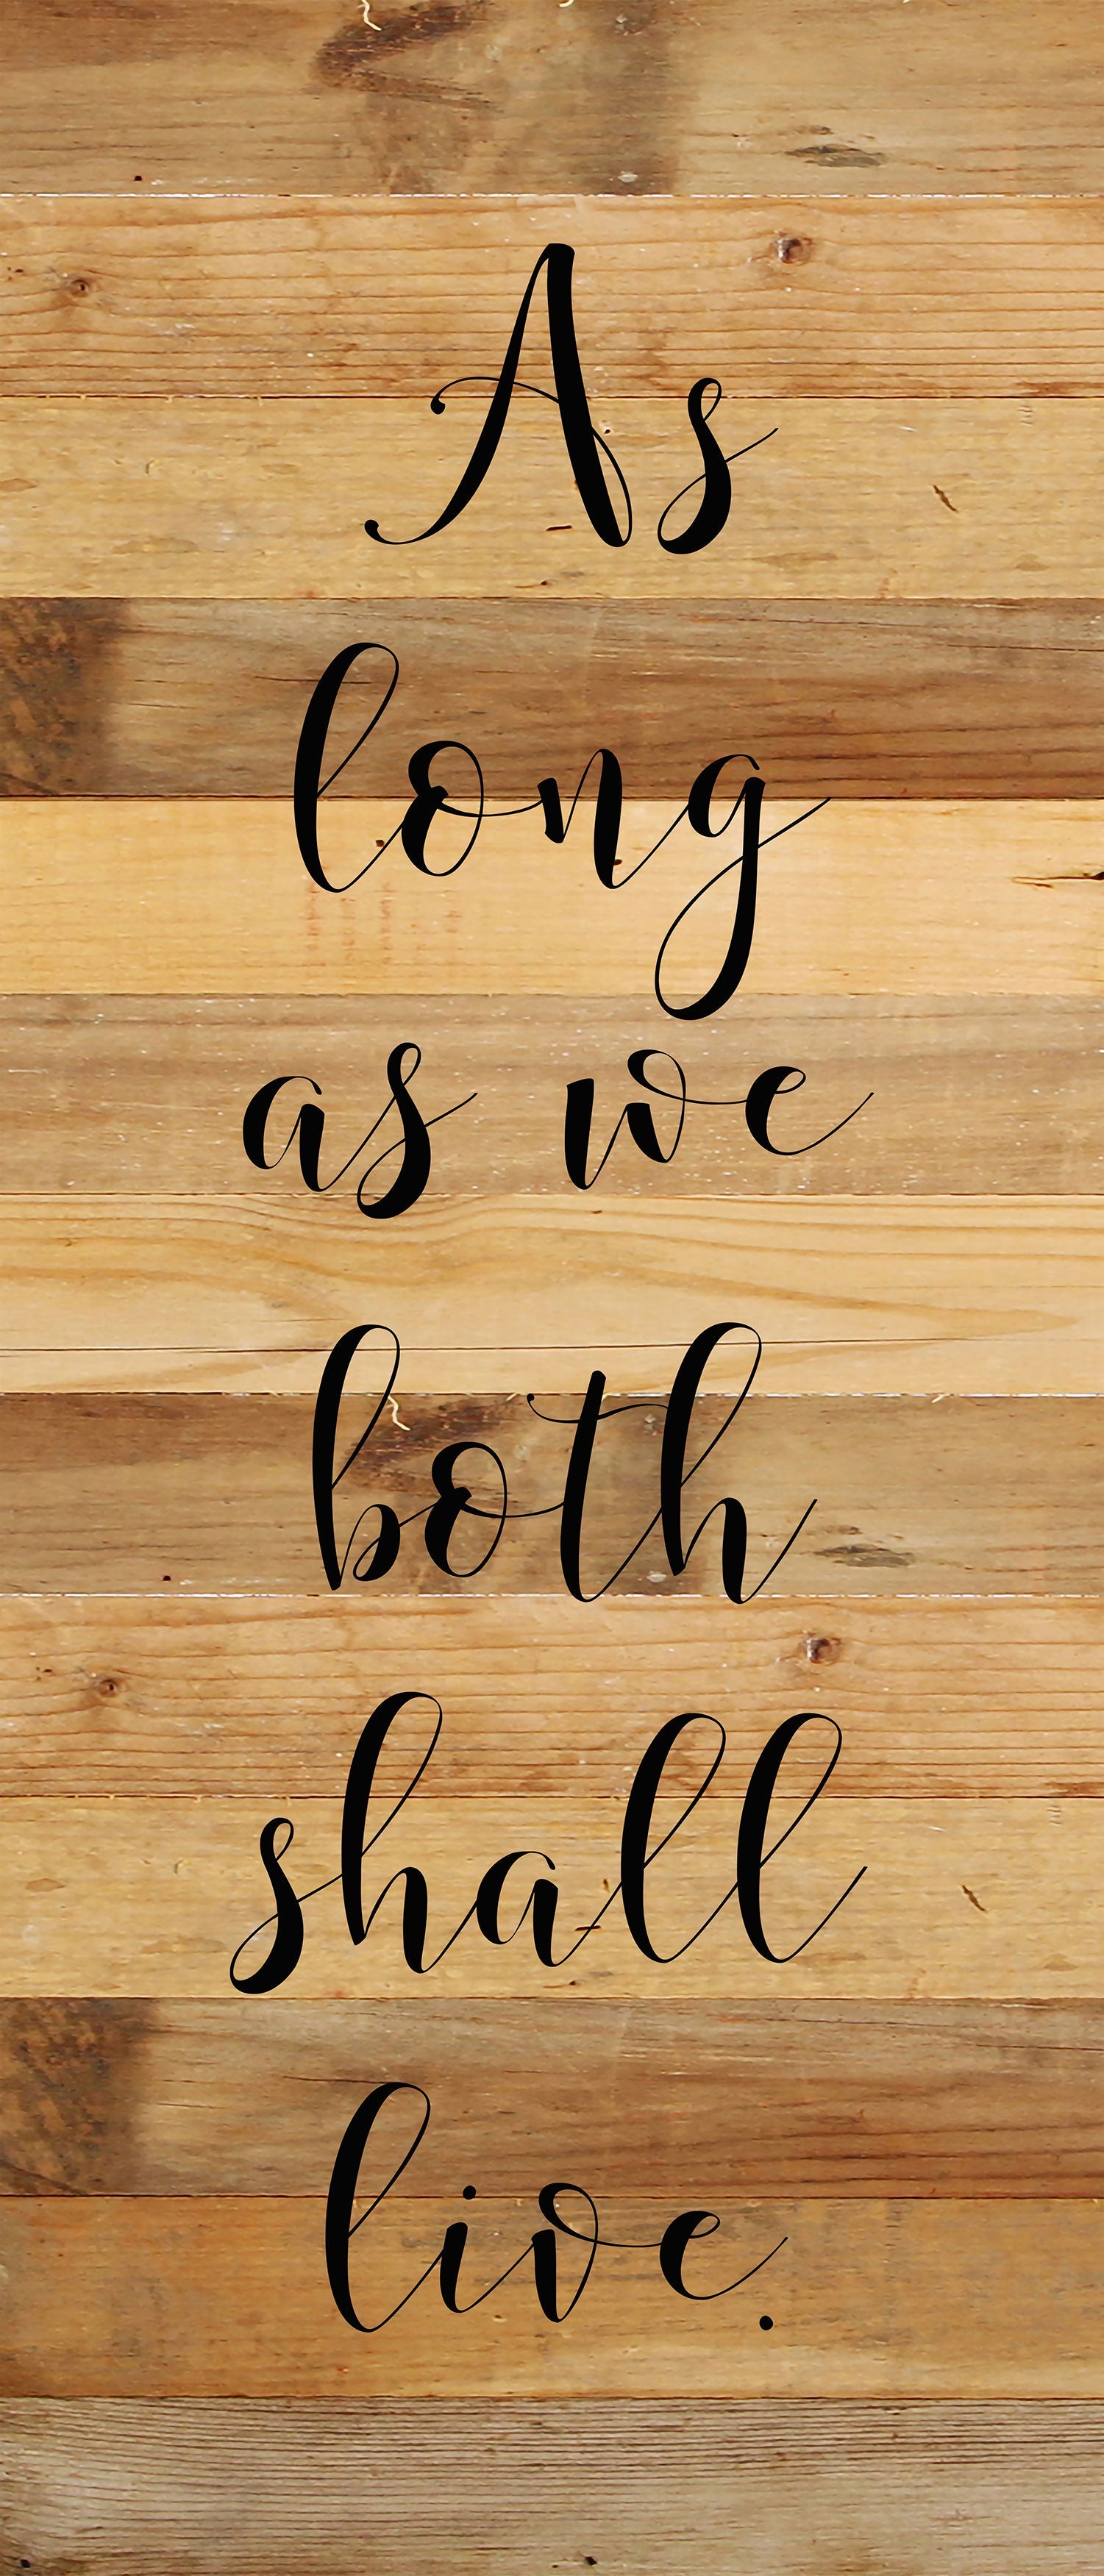 As long as we both shall live / 6"x14" Reclaimed Wood Sign